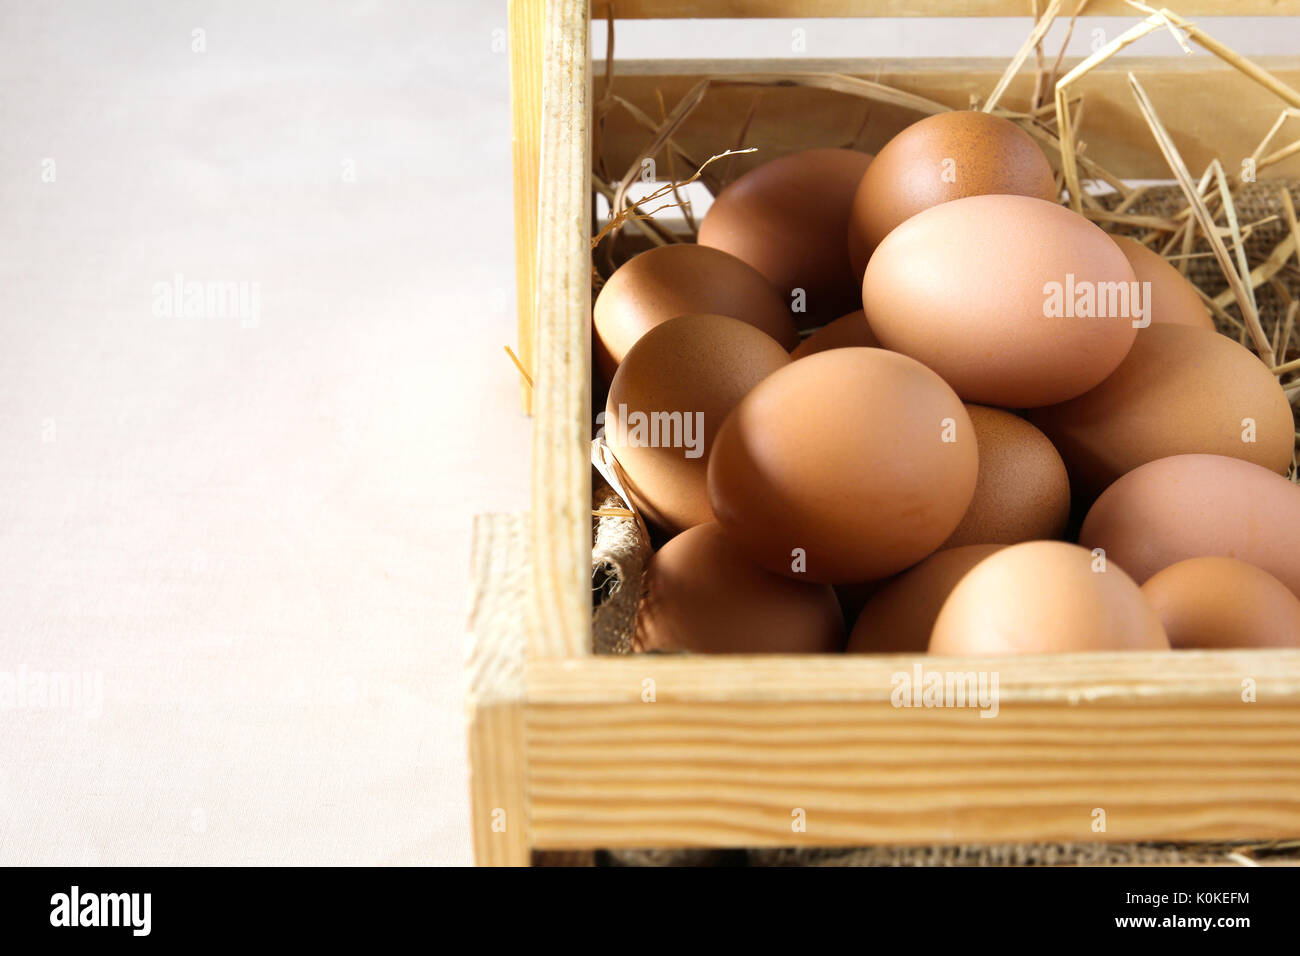 Eggs in wooden box. Stock Photo